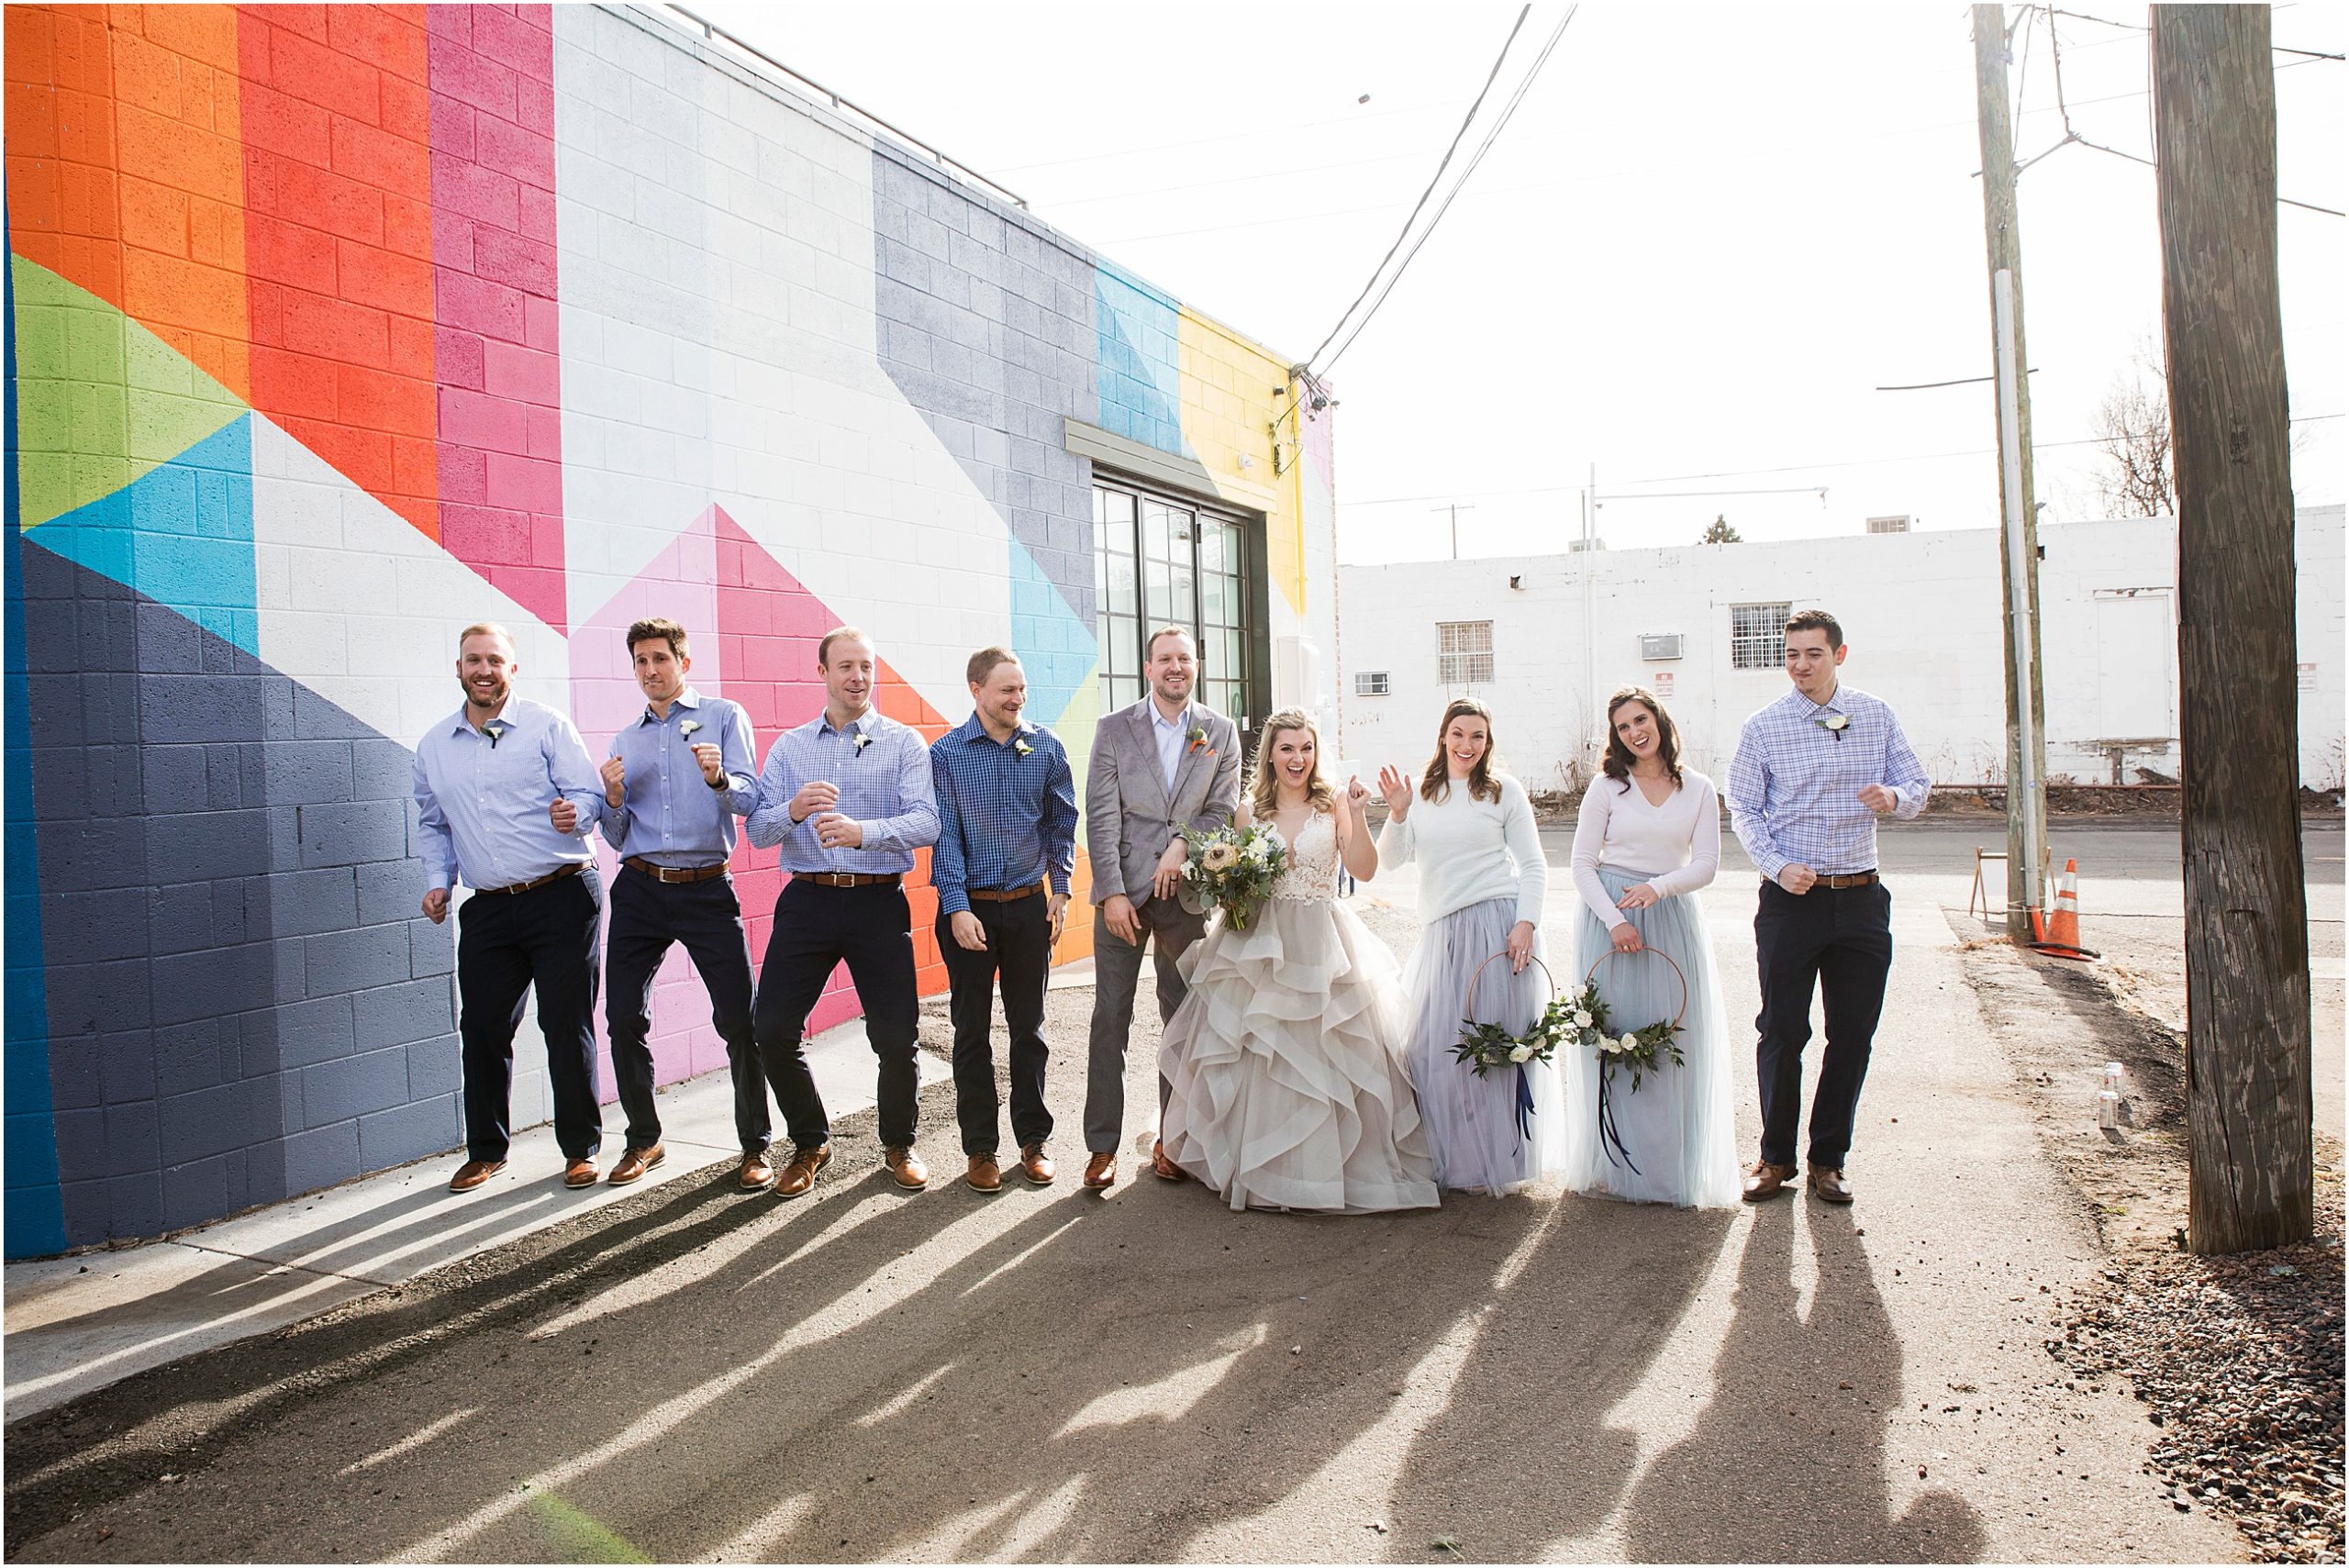 Wedding party dances near a brightly colored wall at an art gallery in Denver